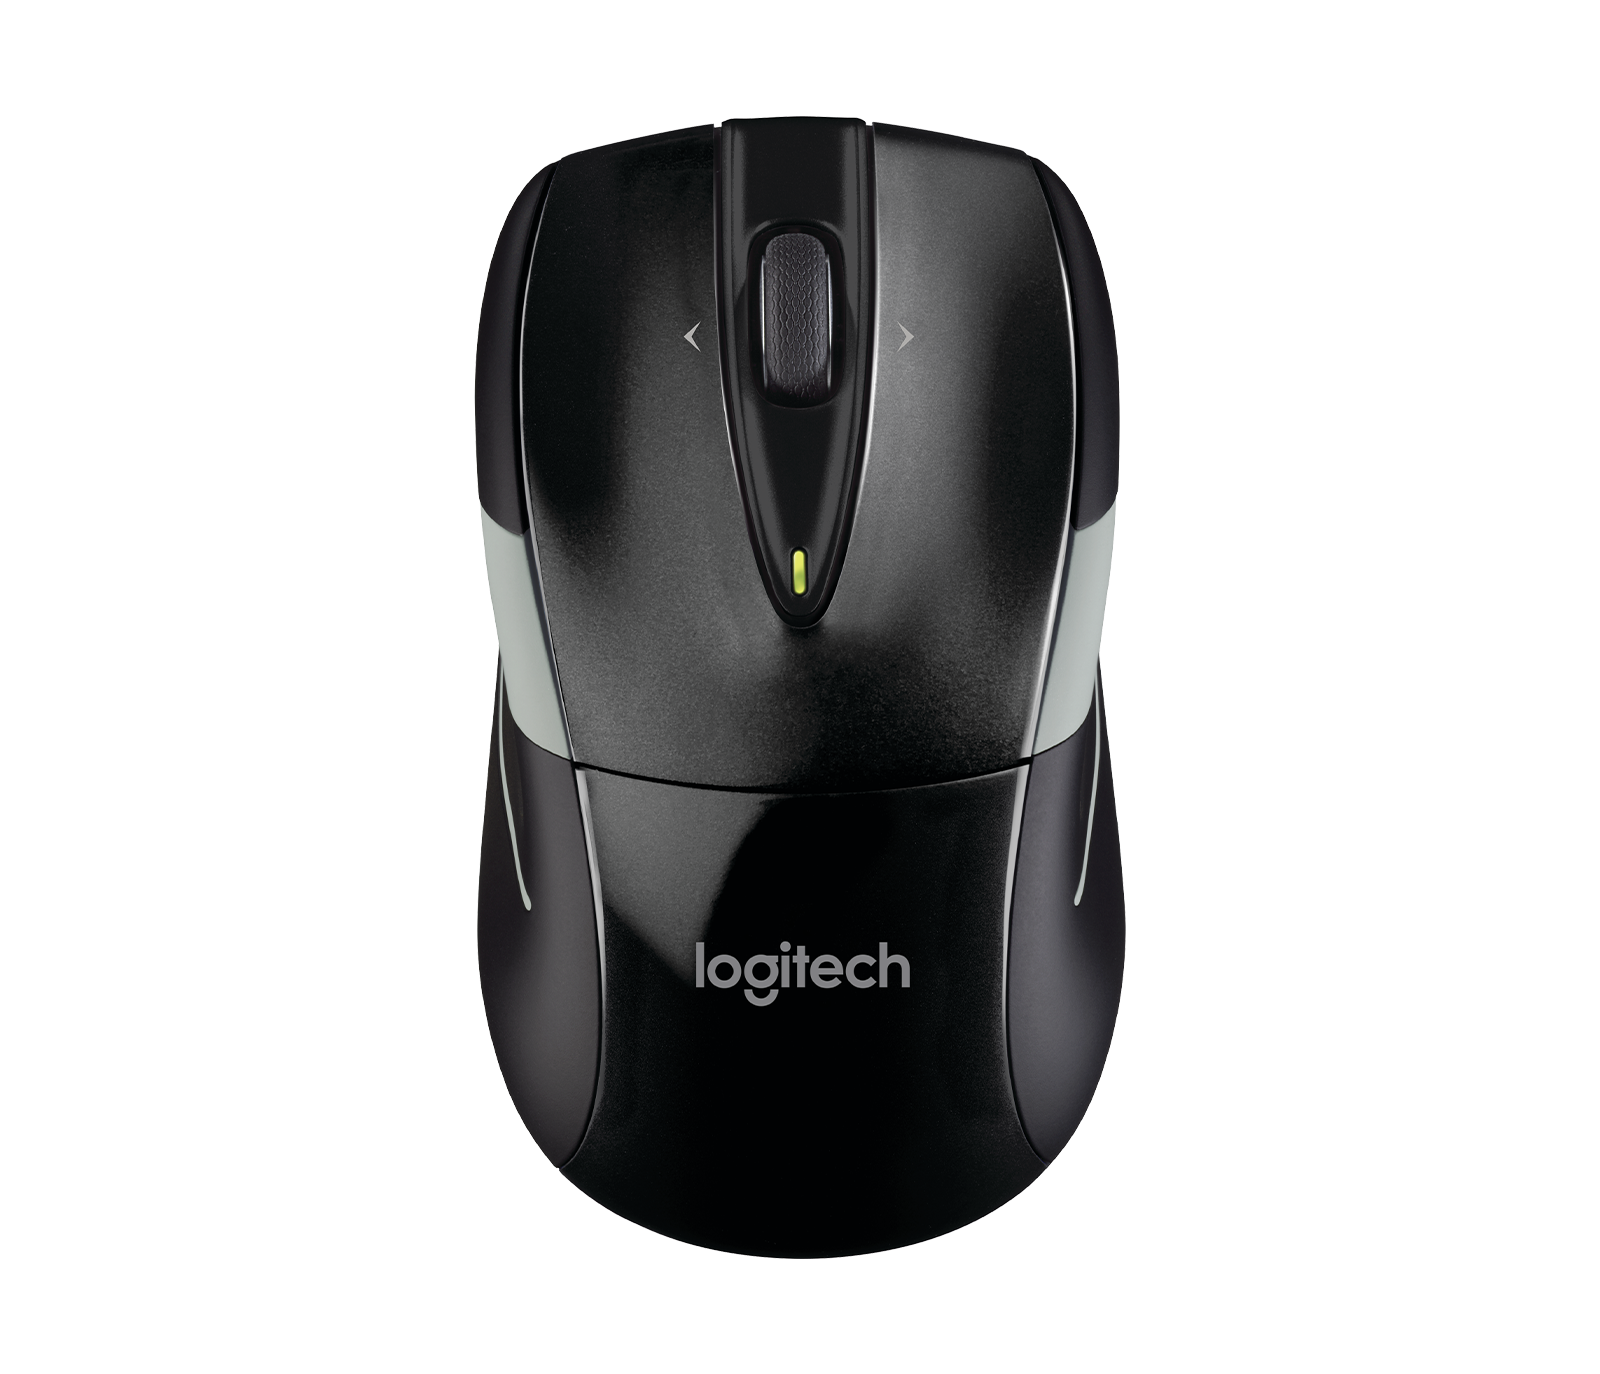 to Erasure fiktion Logitech M525 Wireless Mouse with Precision Scrolling